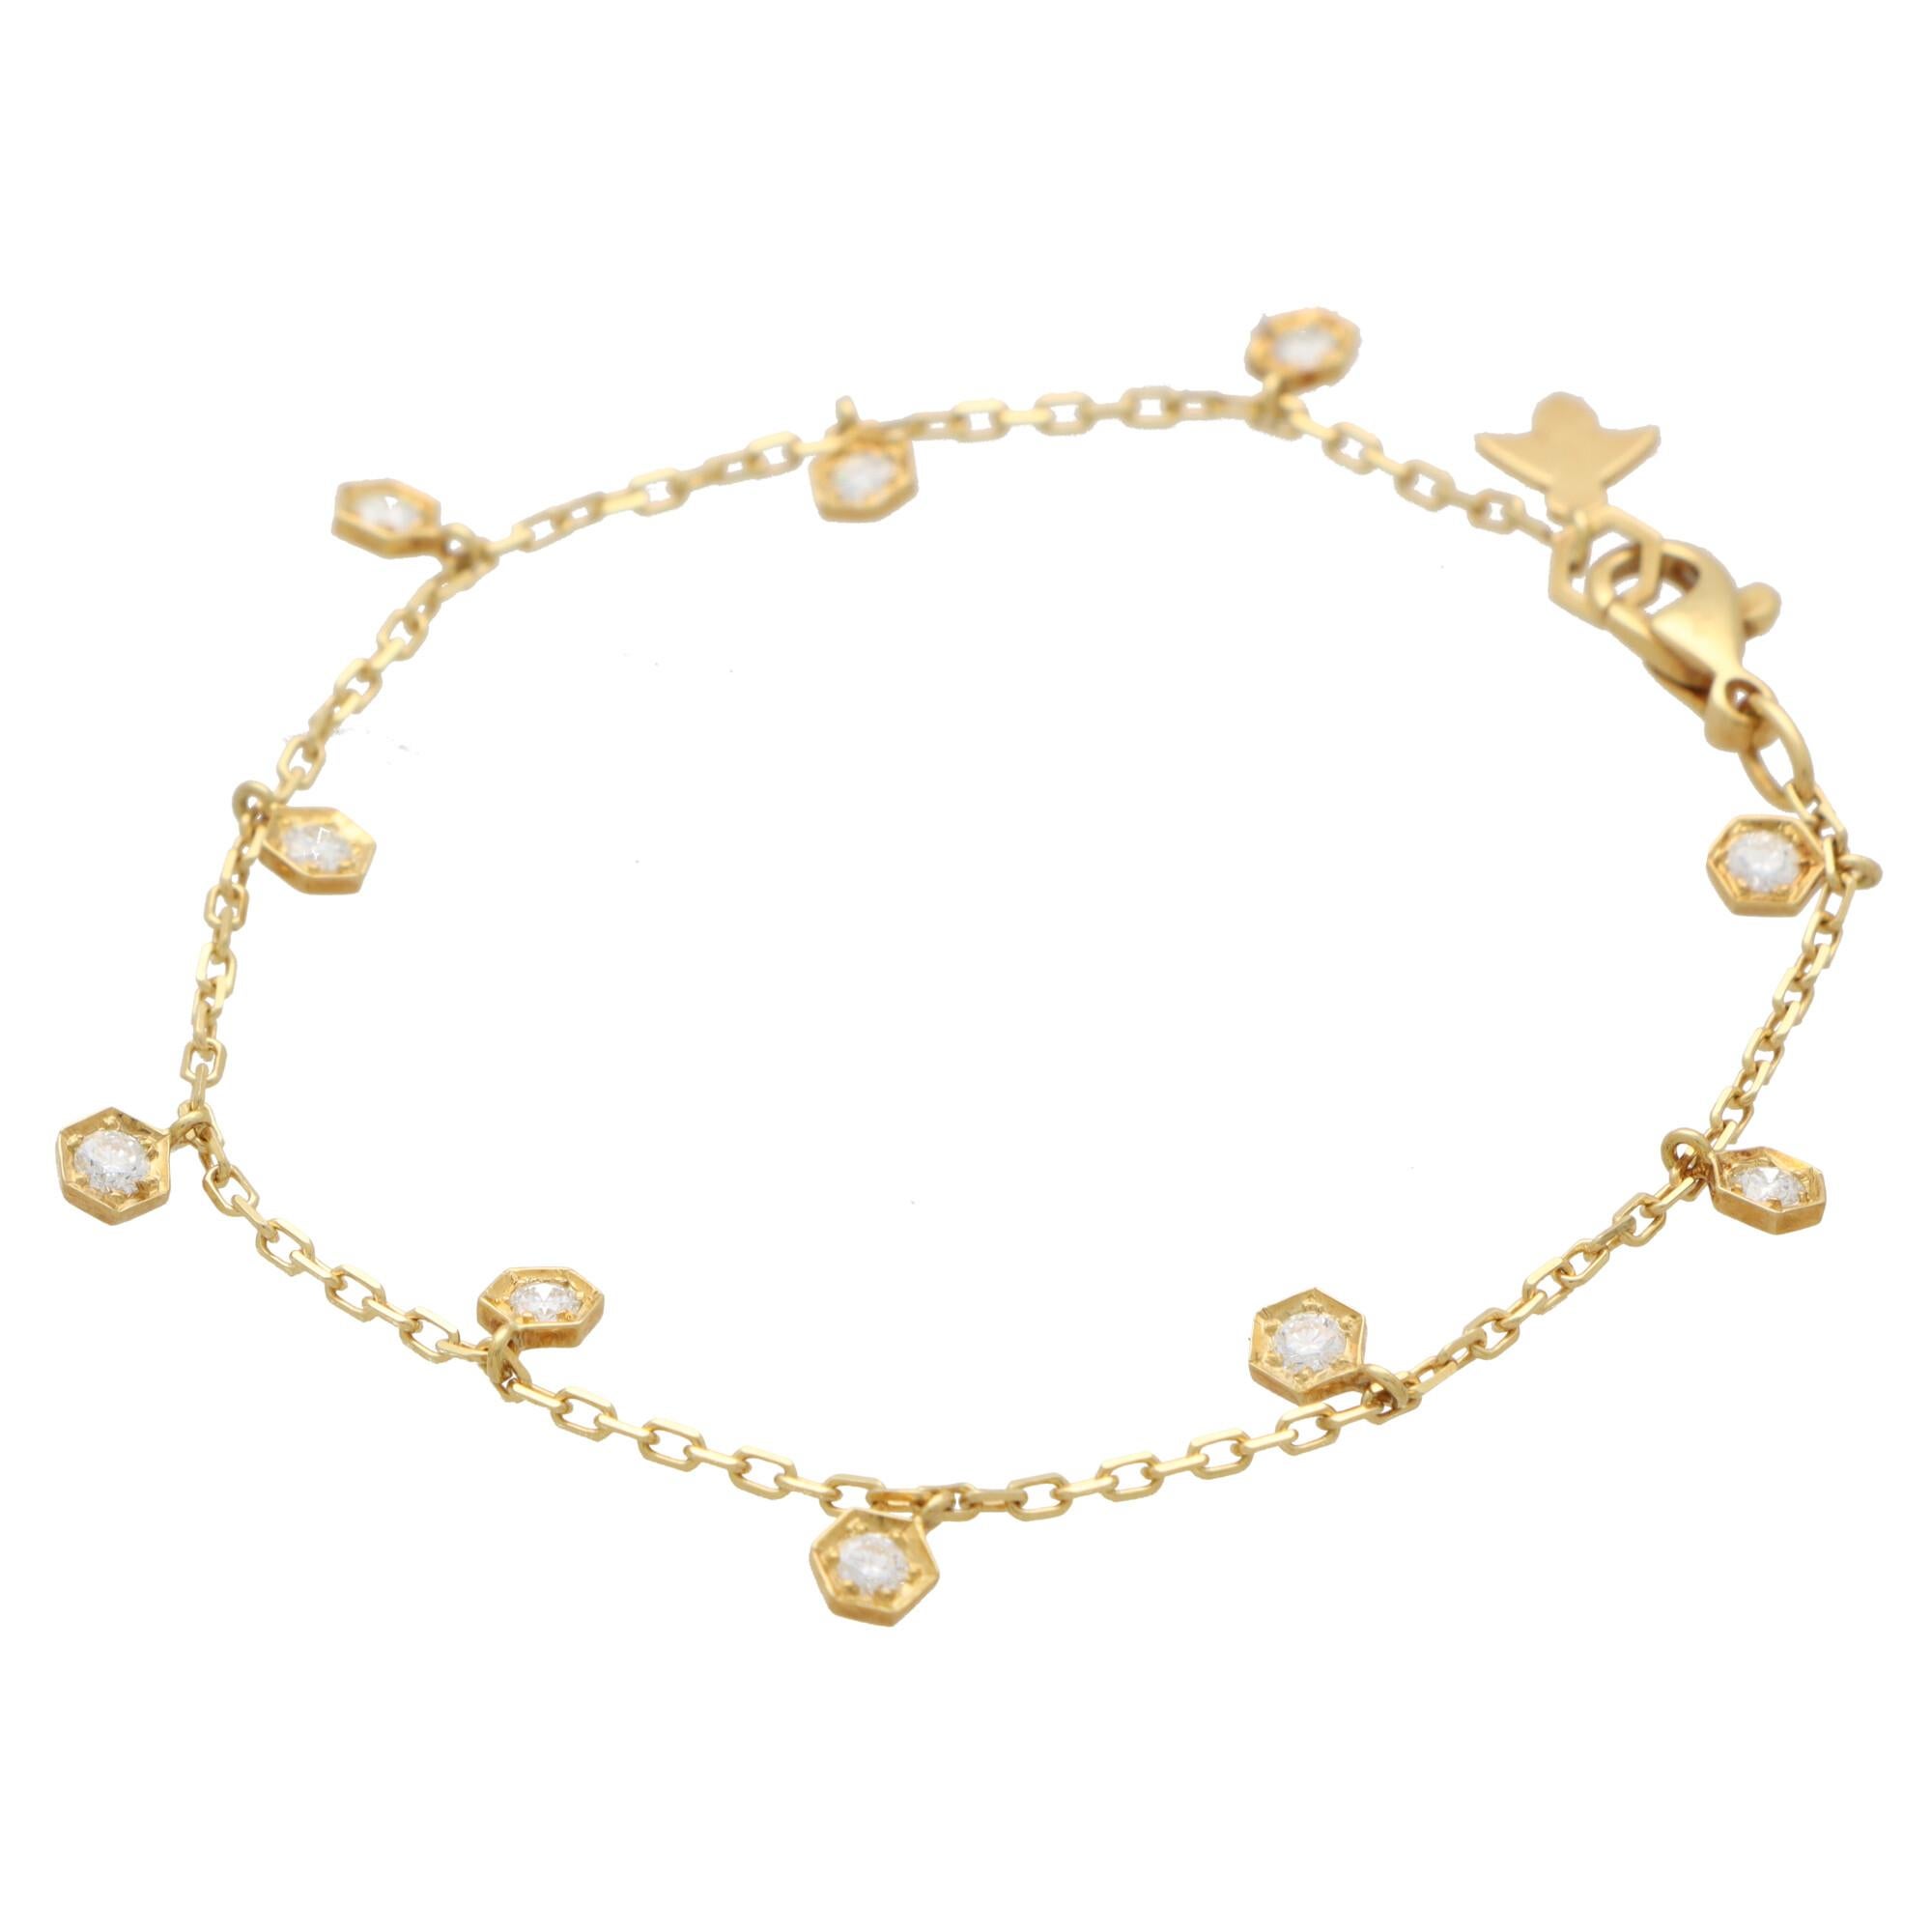  A stylish vintage Piaget Honeycomb Bee diamond chain bracelet set in 18k yellow gold.

The bracelet is composed of a fine yellow gold trace chain from which 10 honeycomb charms dangle from. Set centrally to each honeycomb is a round brilliant cut